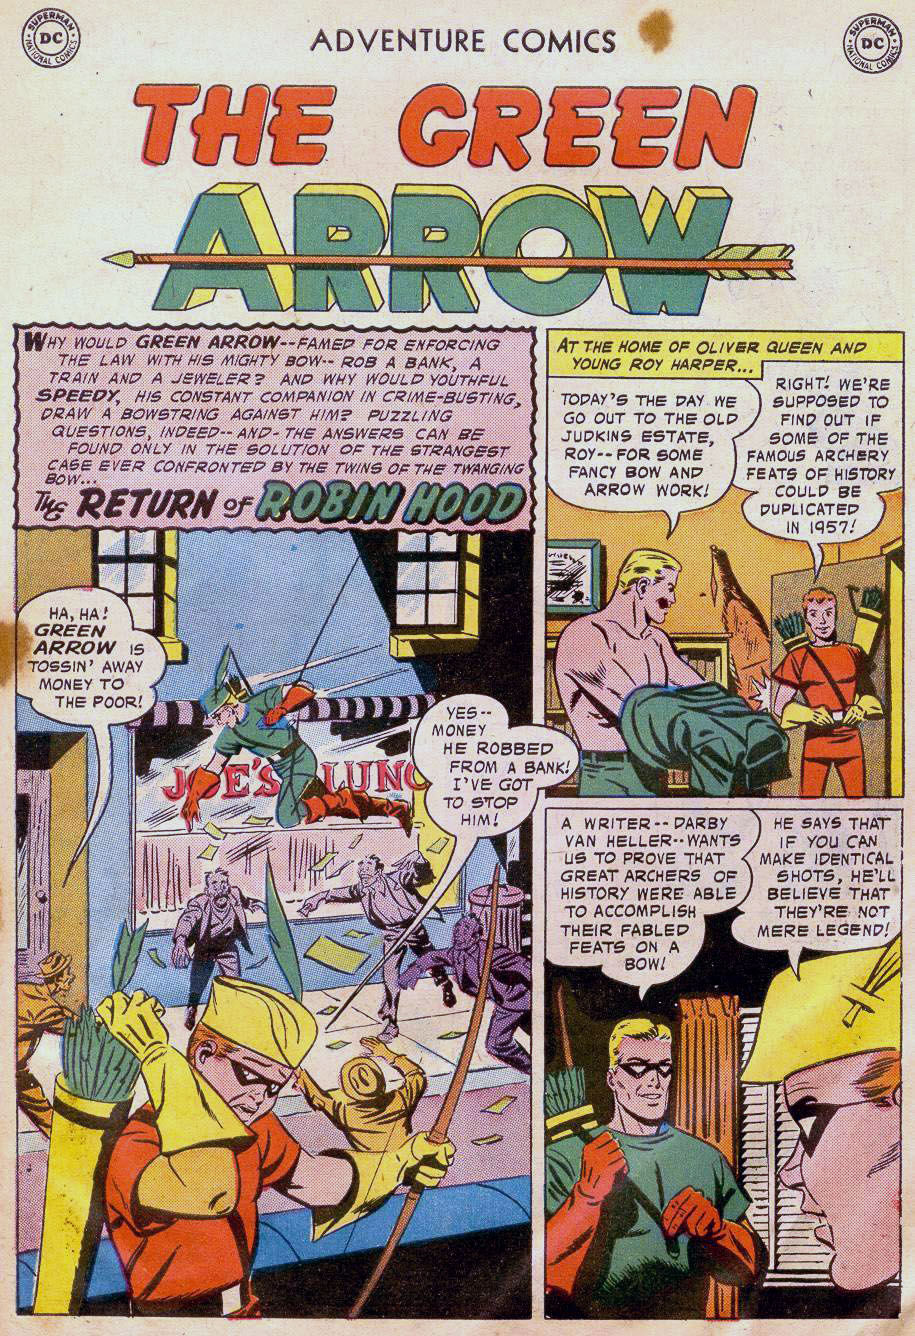 The title panel for the Green Arrow story in Adventure Comics #242, art by George Papp